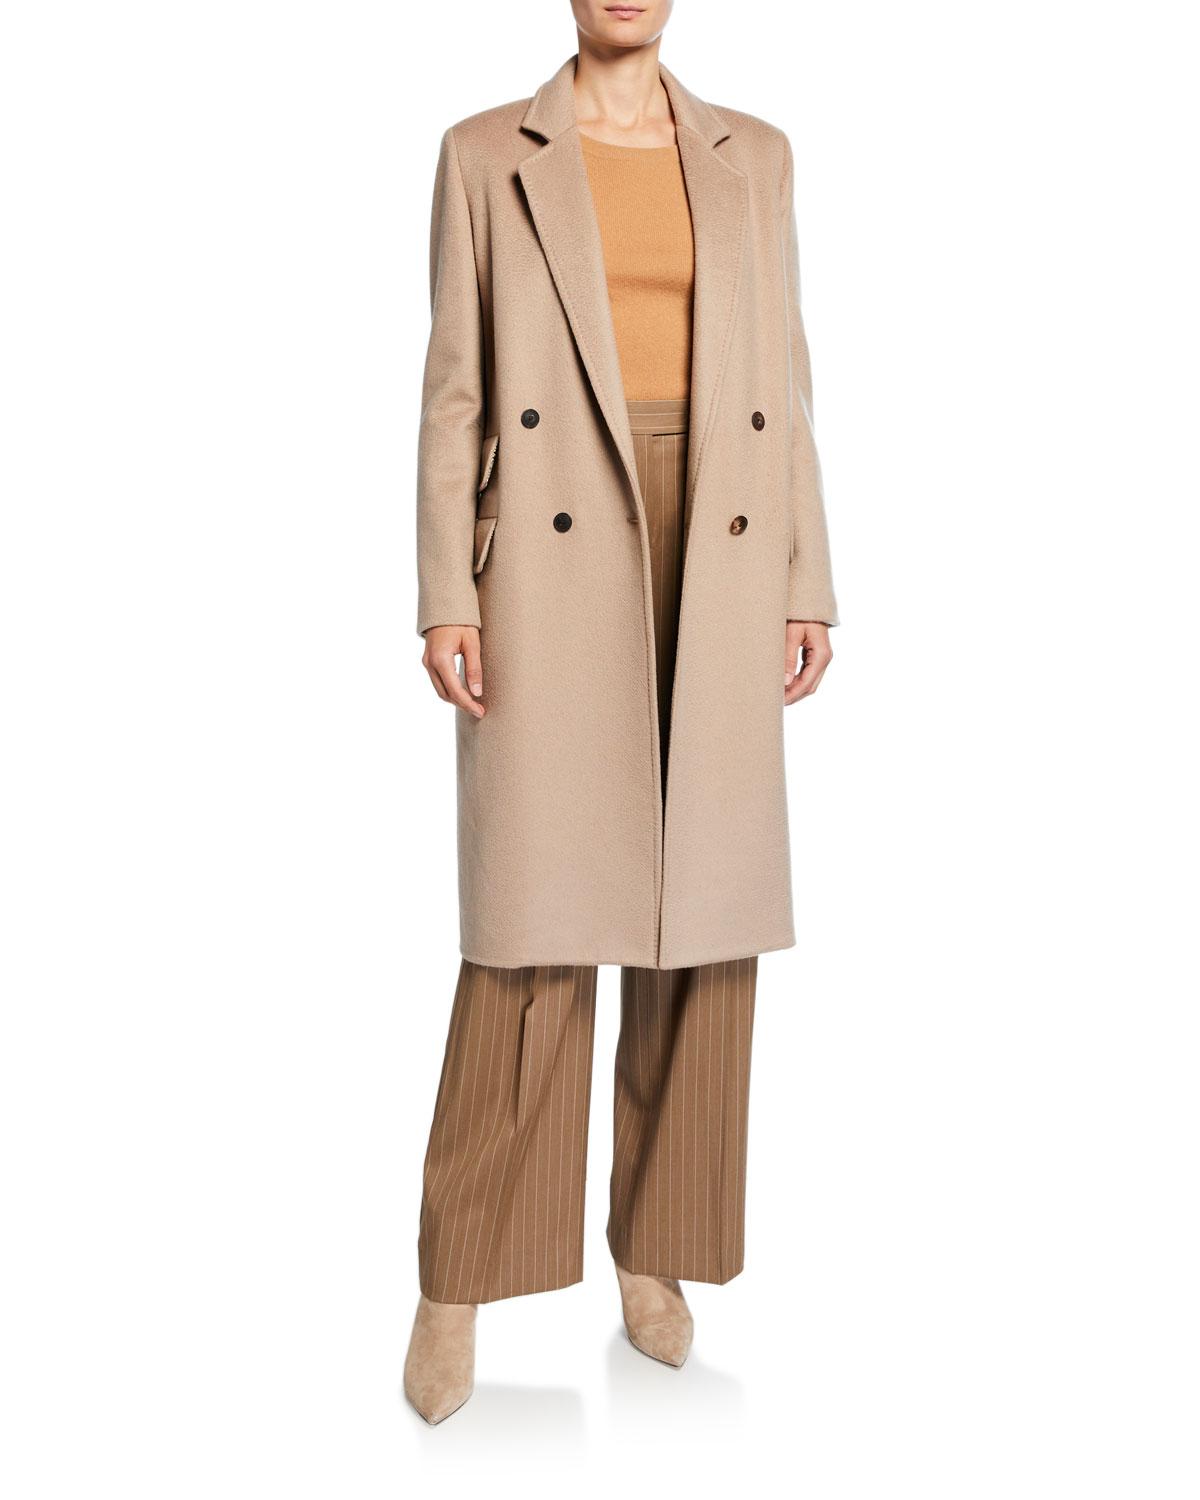 Max Mara Andrea Cashmere Double-breasted Coat in Brown - Lyst